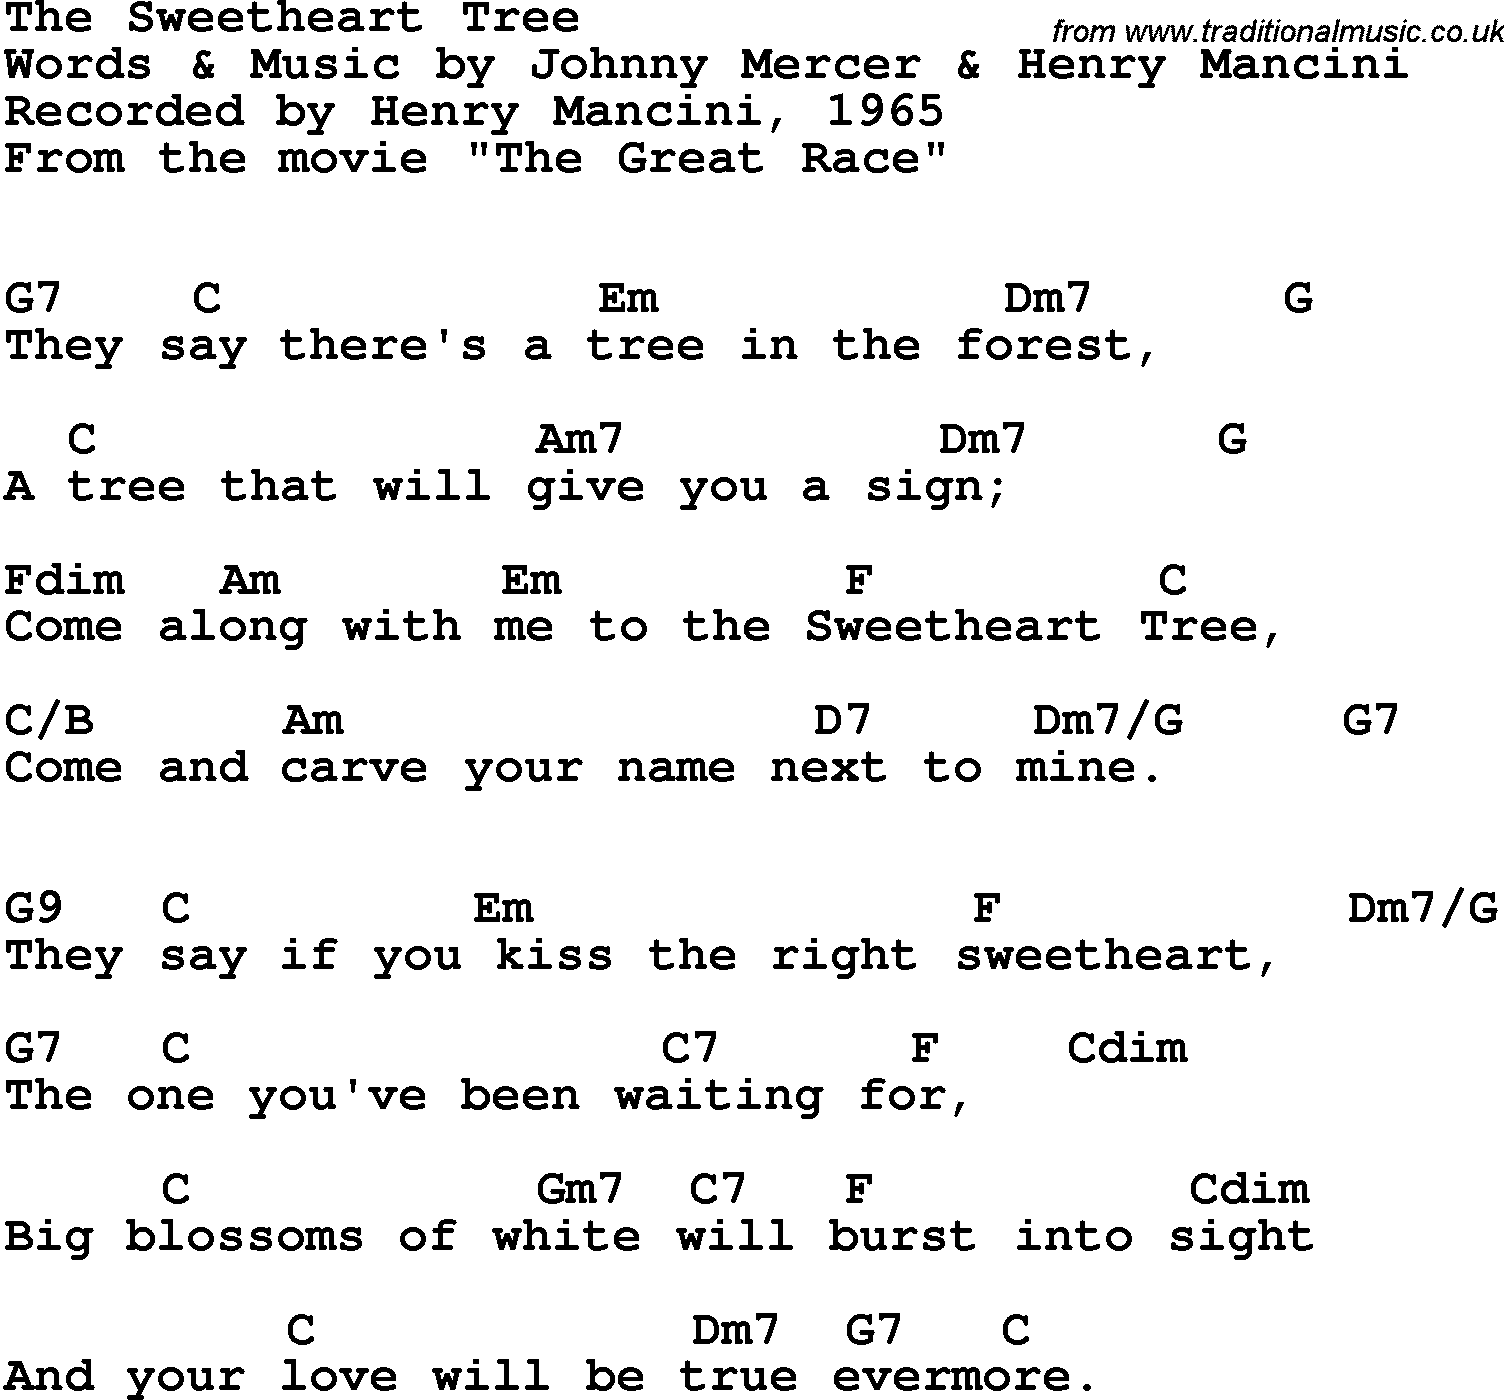 Song Lyrics with guitar chords for Sweetheart Tree, The - Henry Mancini, 1965